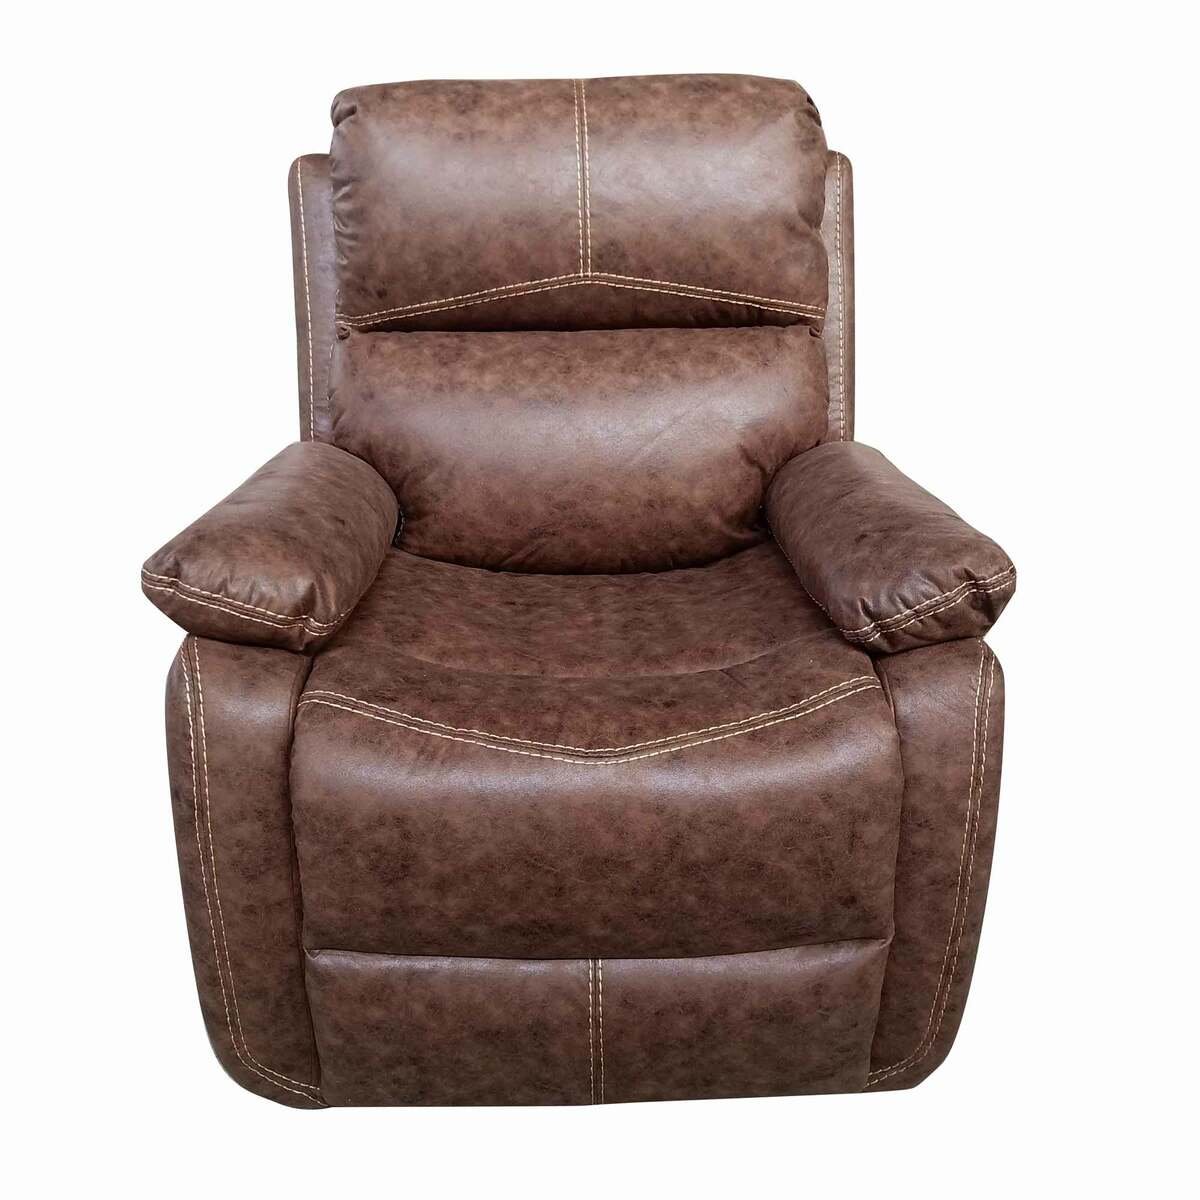 Maple Leaf Home Recliner Sofa Chair Brown, Size: W85 x H100 x L90 to 140